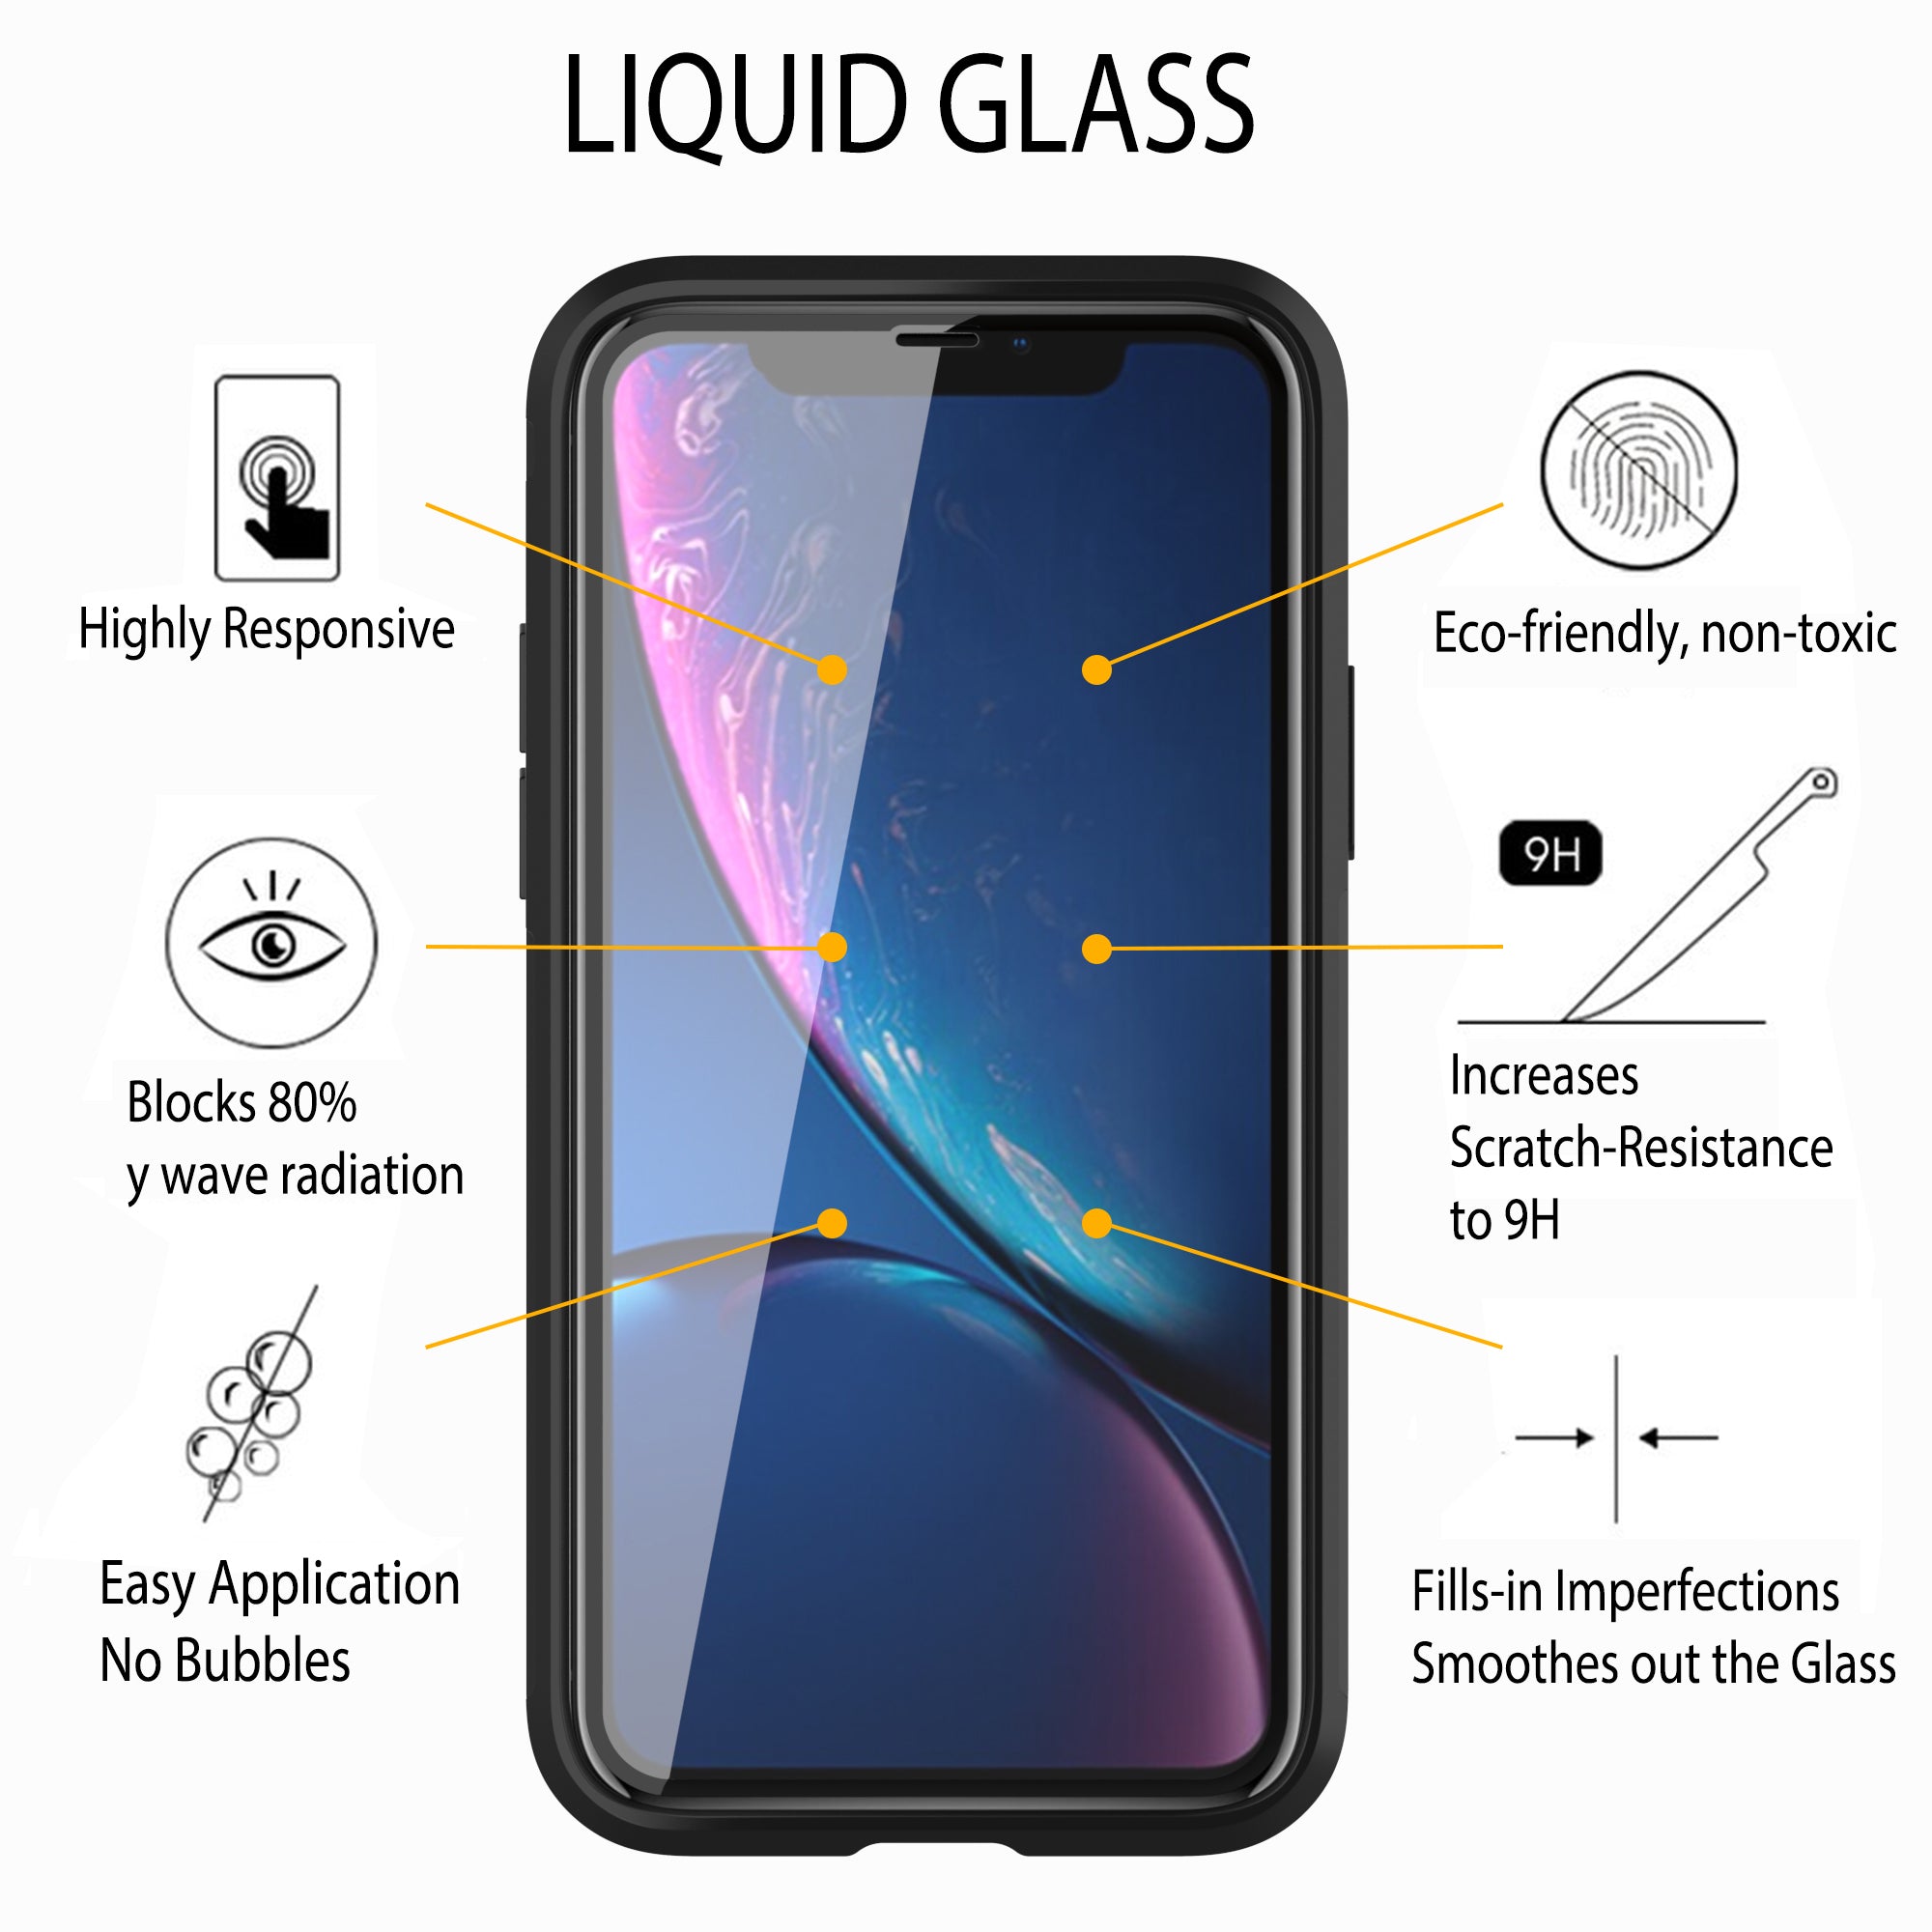 Luvvitt $250 Screen Protection Guarantee Liquid Glass + Tempered Glass Protector Bundle for iPhone 11 Pro Max 2019